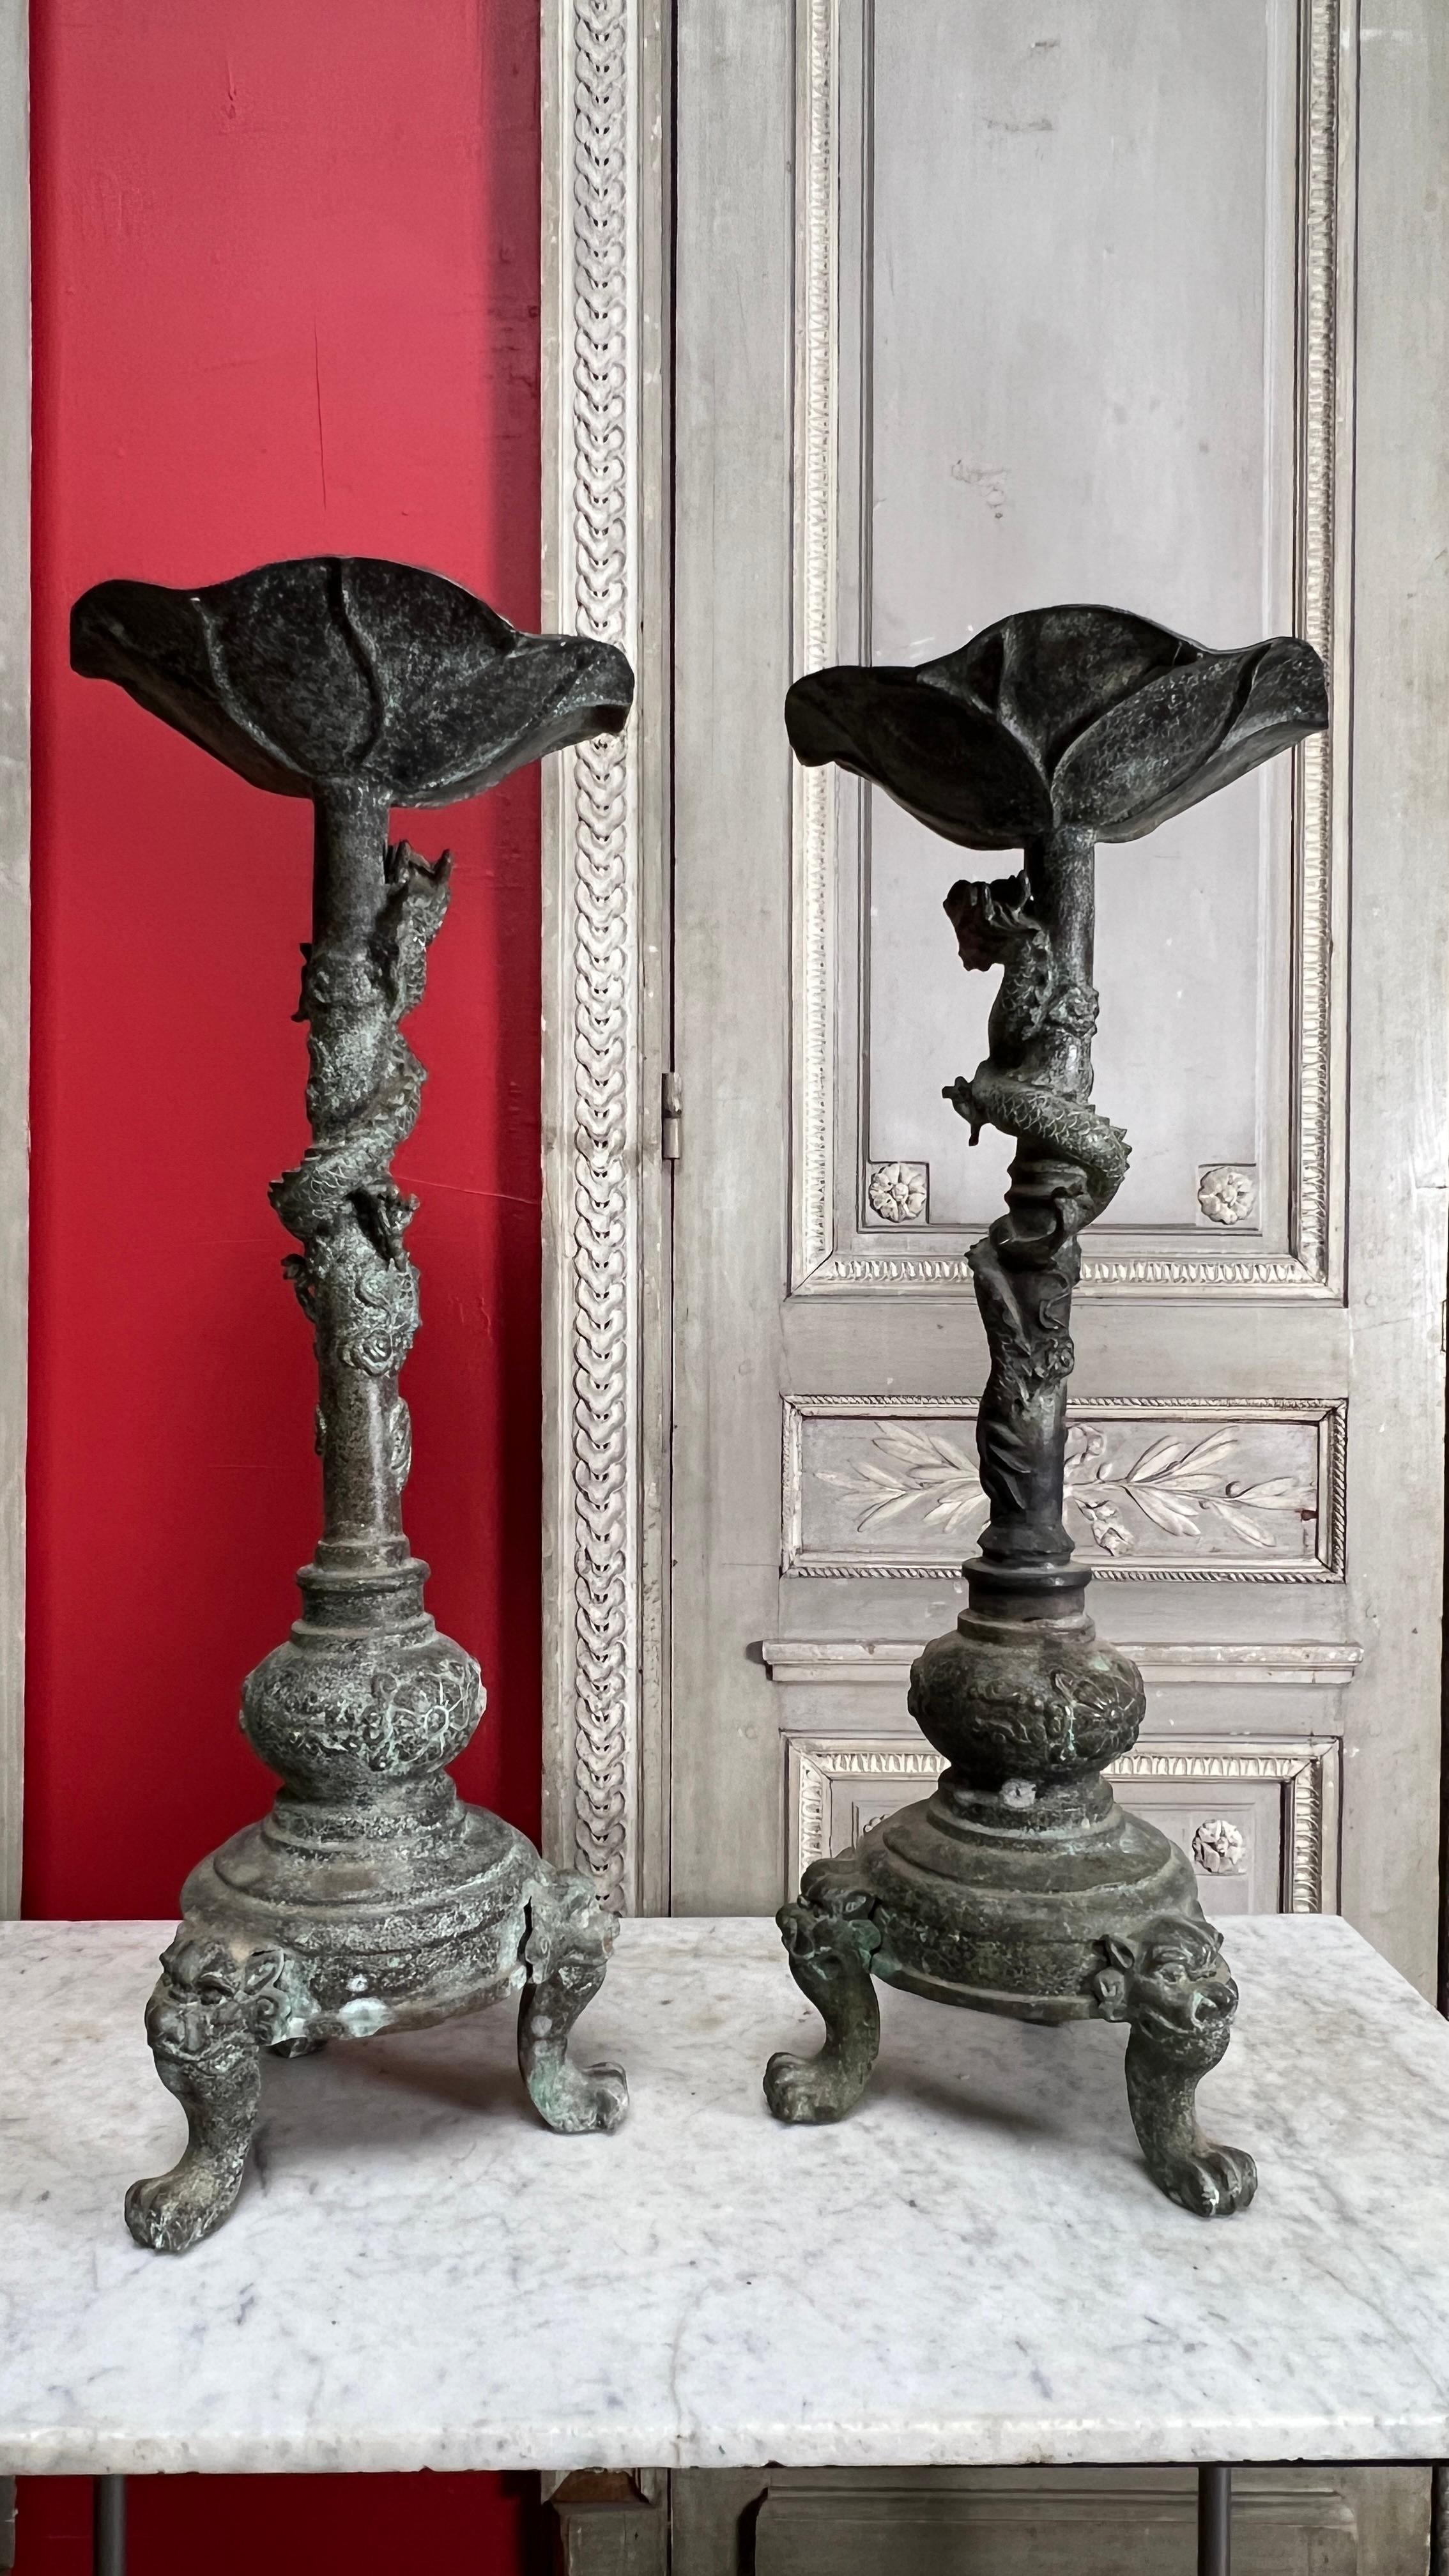 A large pair of Chinese bronze  candle stands candlesticks in a patinated and verdigris finish.  These large and impressive candle holders have three foo dog legs and a dragon wrapped around the column, topped with a lotus. 
They are highly